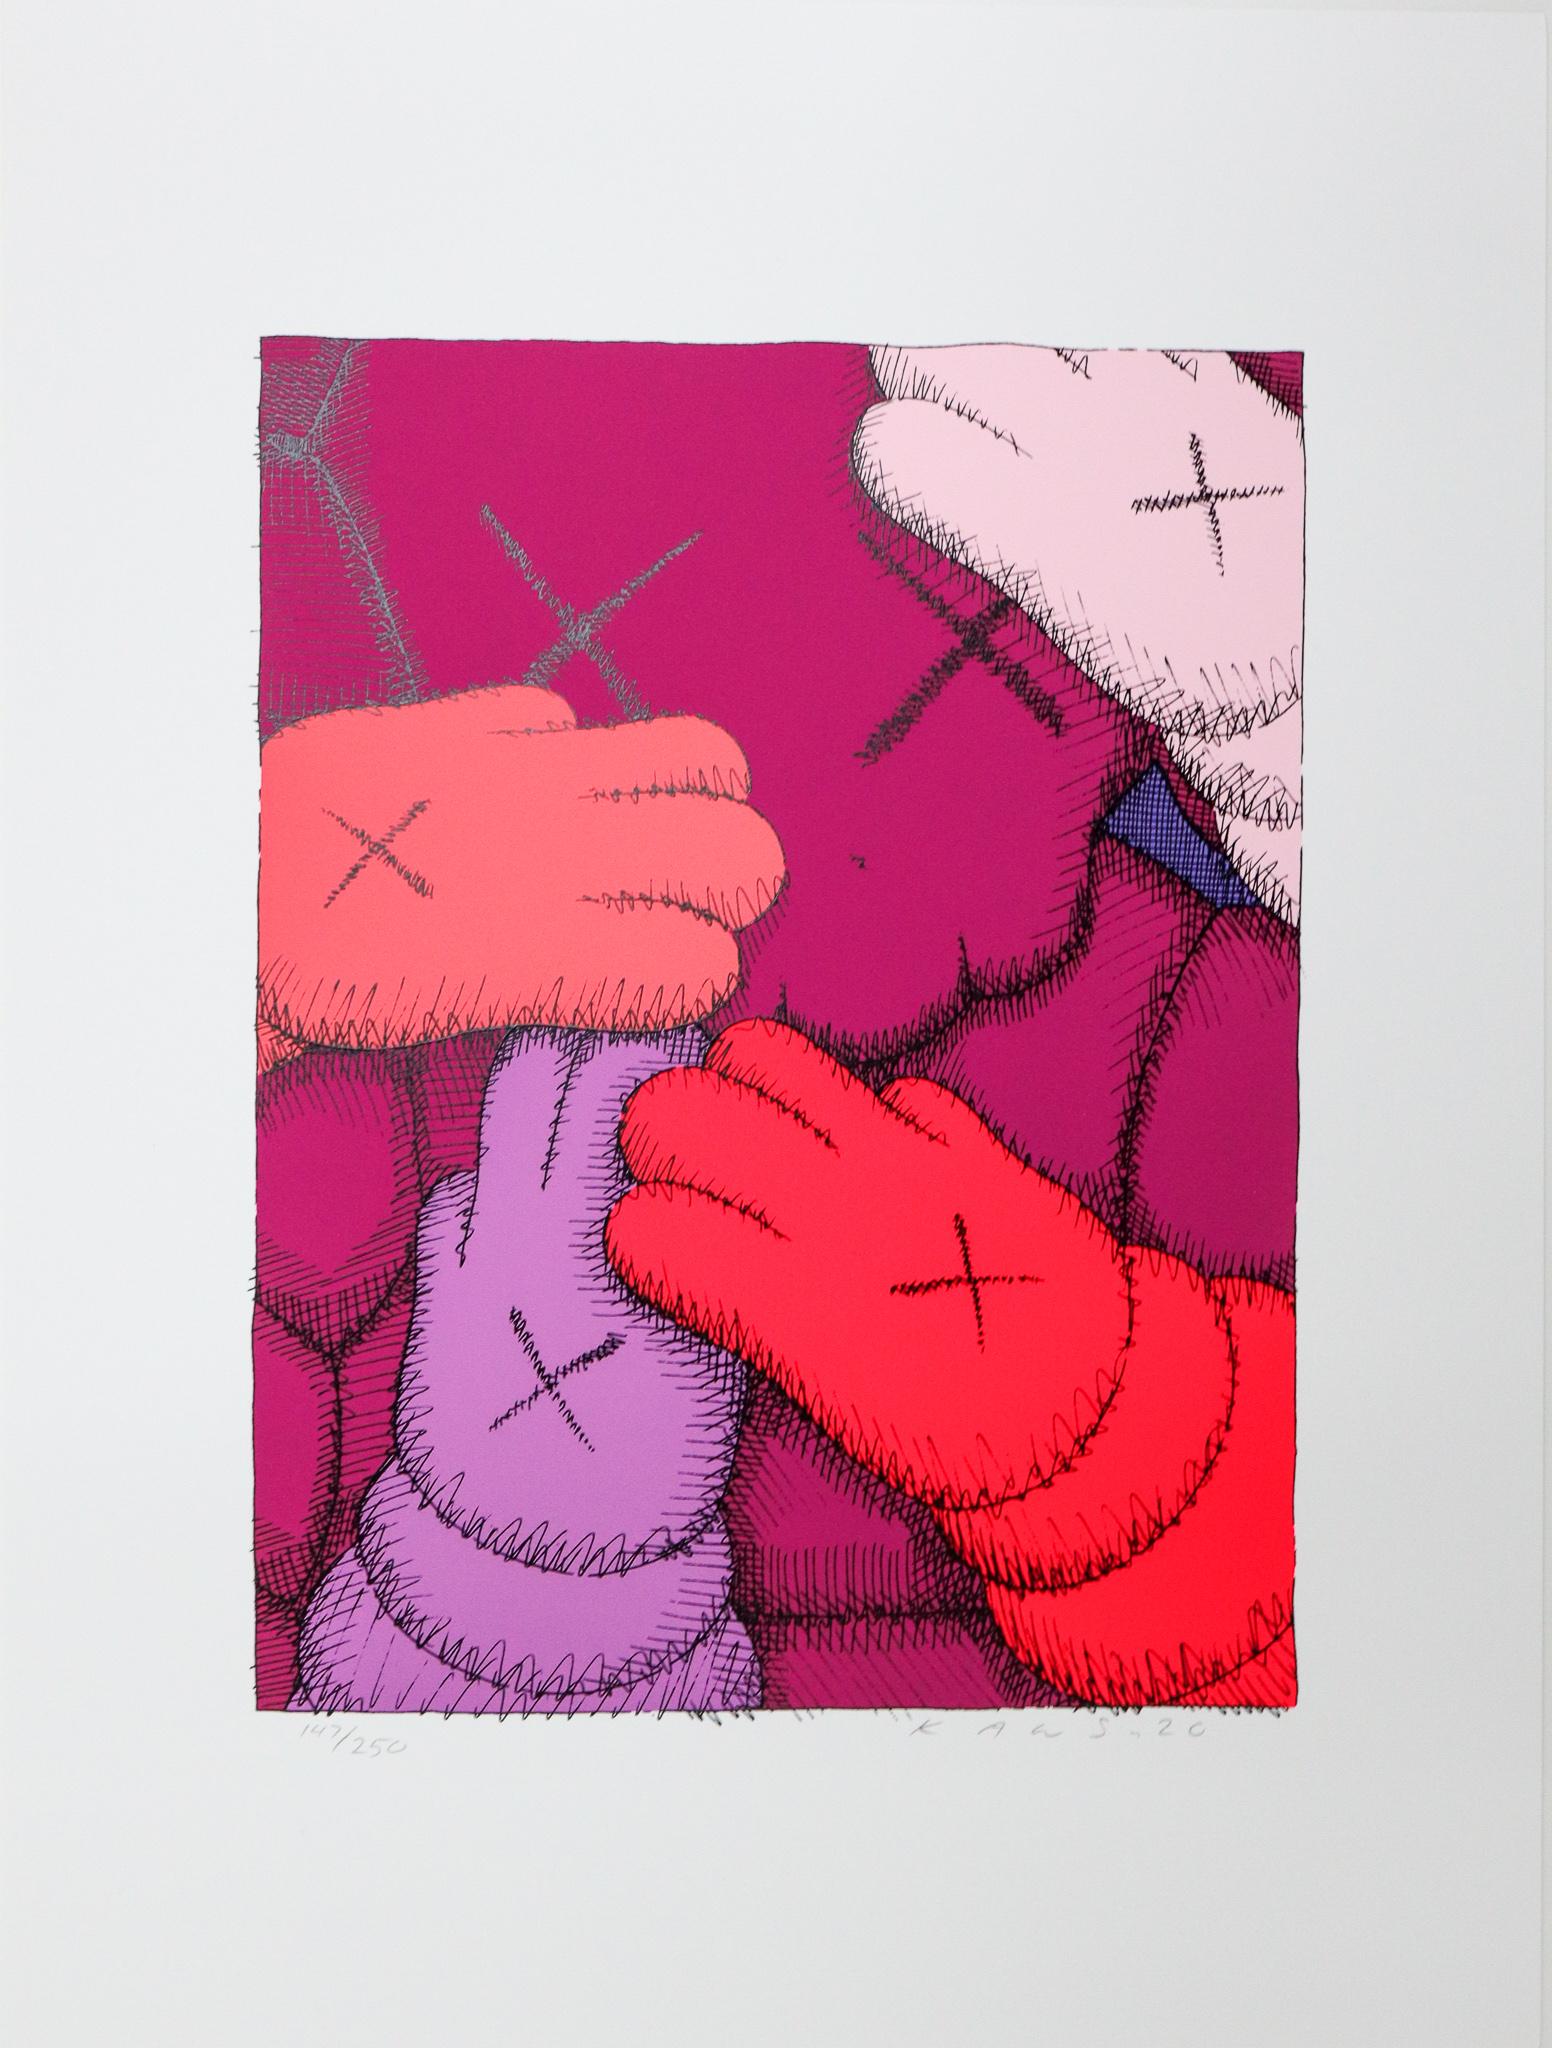 KAWS
Untitled from Urge (Maroon)
From the rare limited edition of 250
Original Screen print on paper
Hand signed and numbered
MINT Condition
